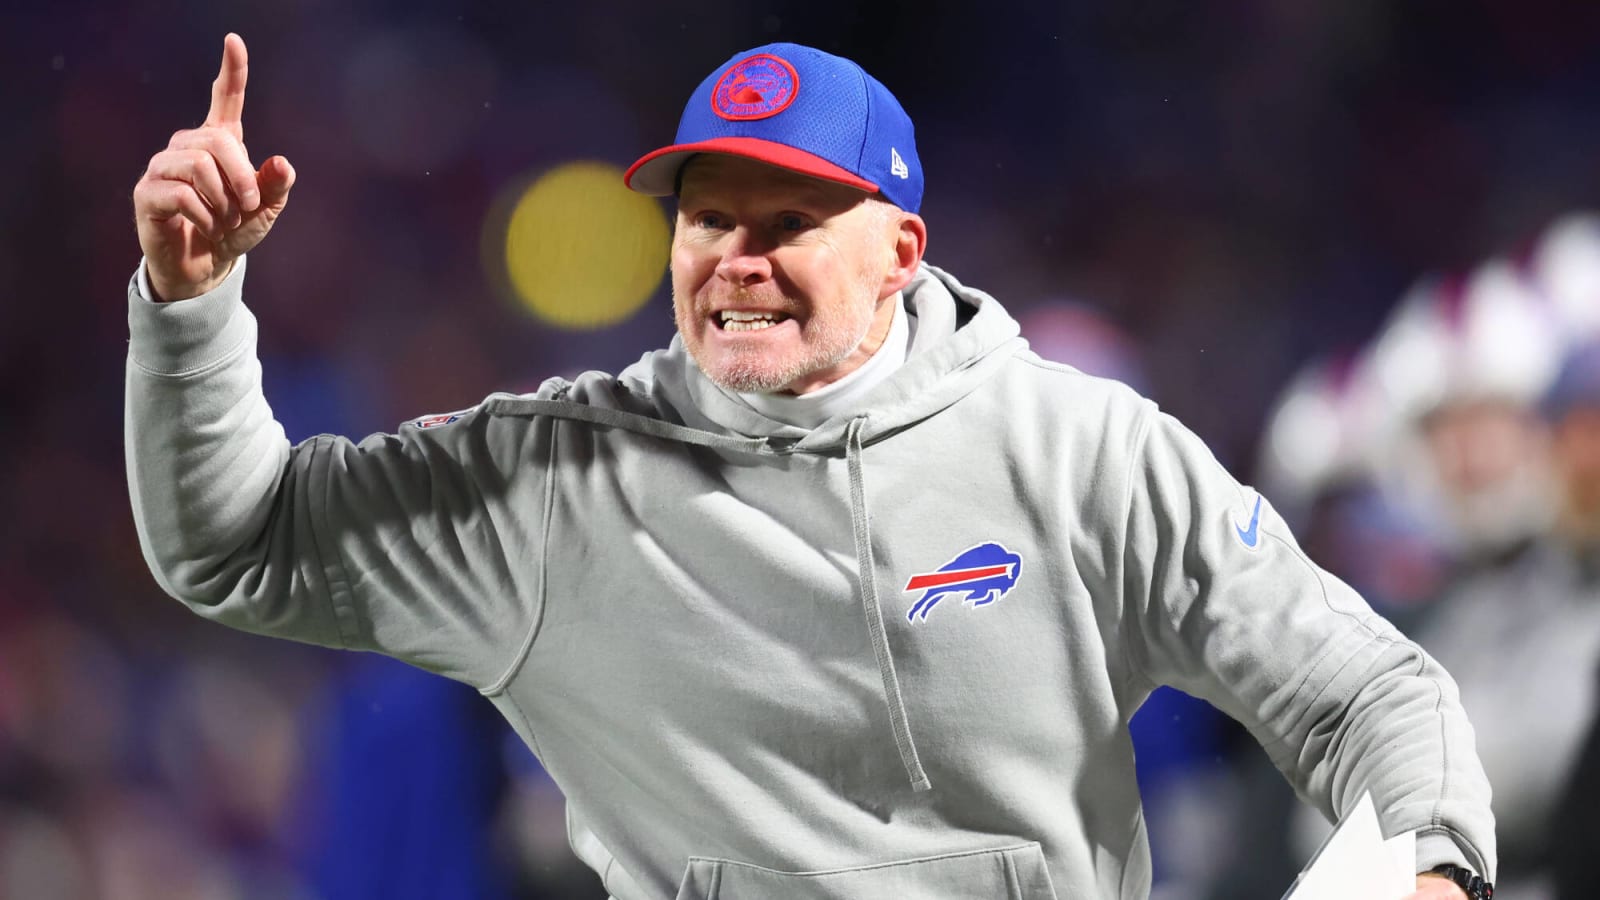 Buffalo Bills: Sean McDermott Addresses Media With Bold Statement About Future, Reveals Plans For Potential Changes